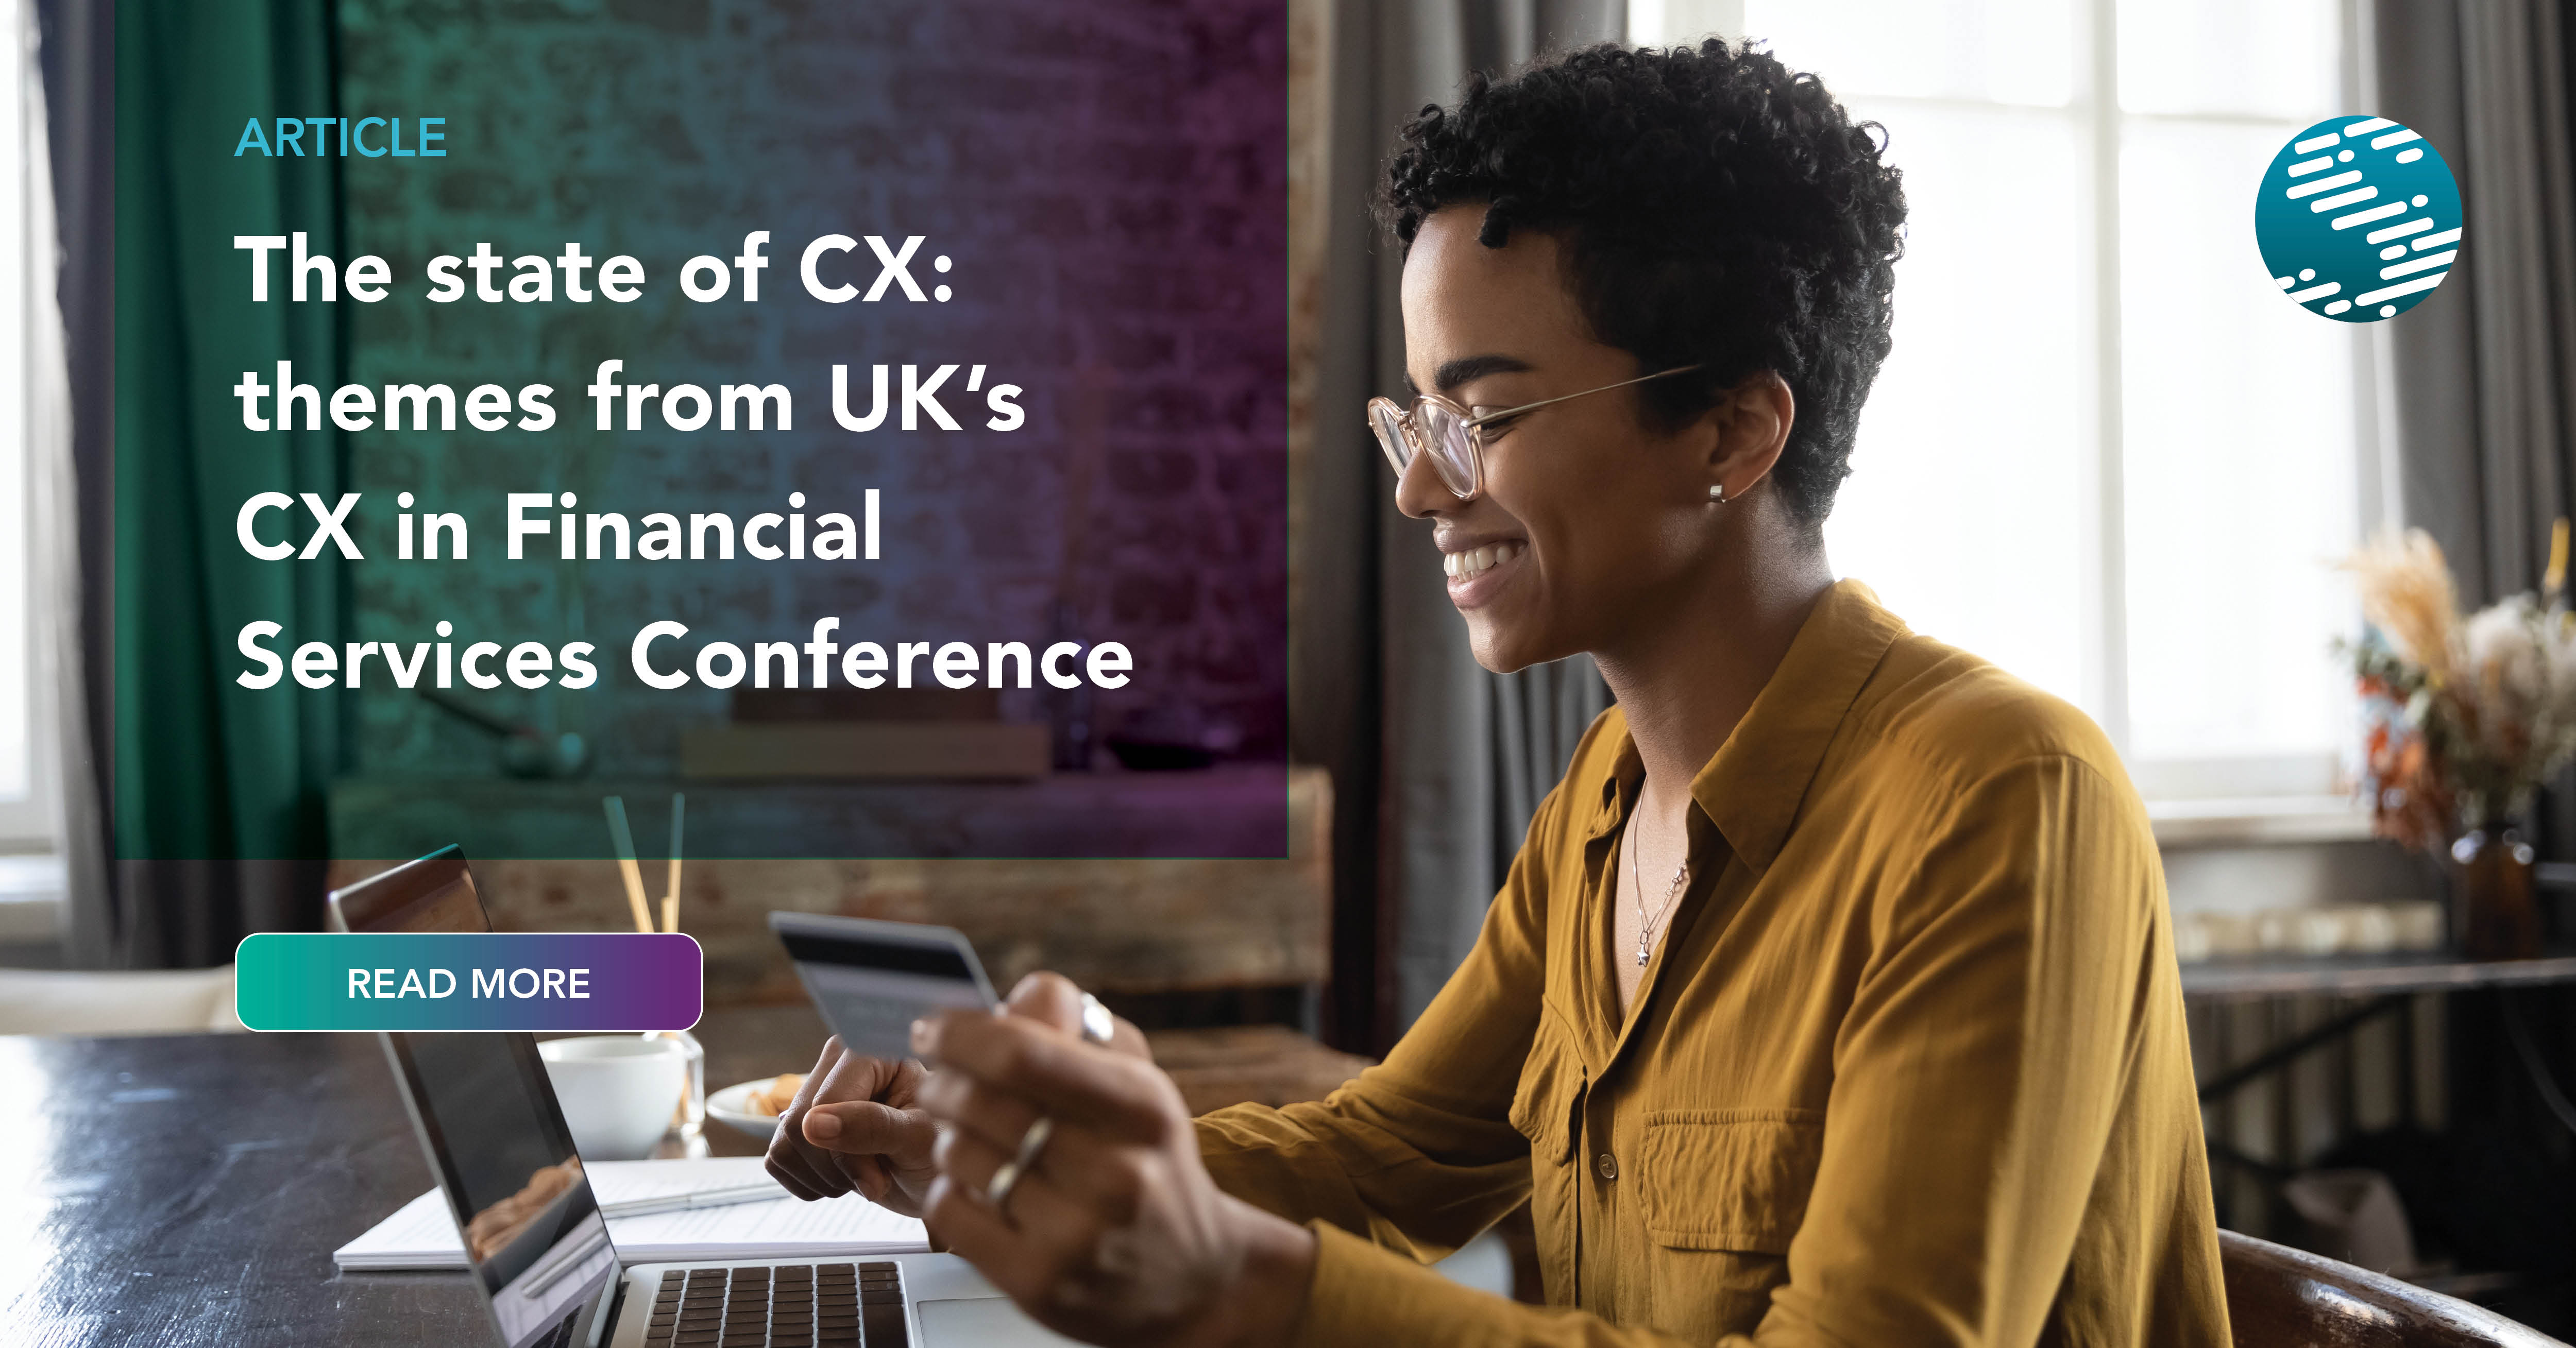 The state of CX: themes from UK’s CX in Financial Services Conference